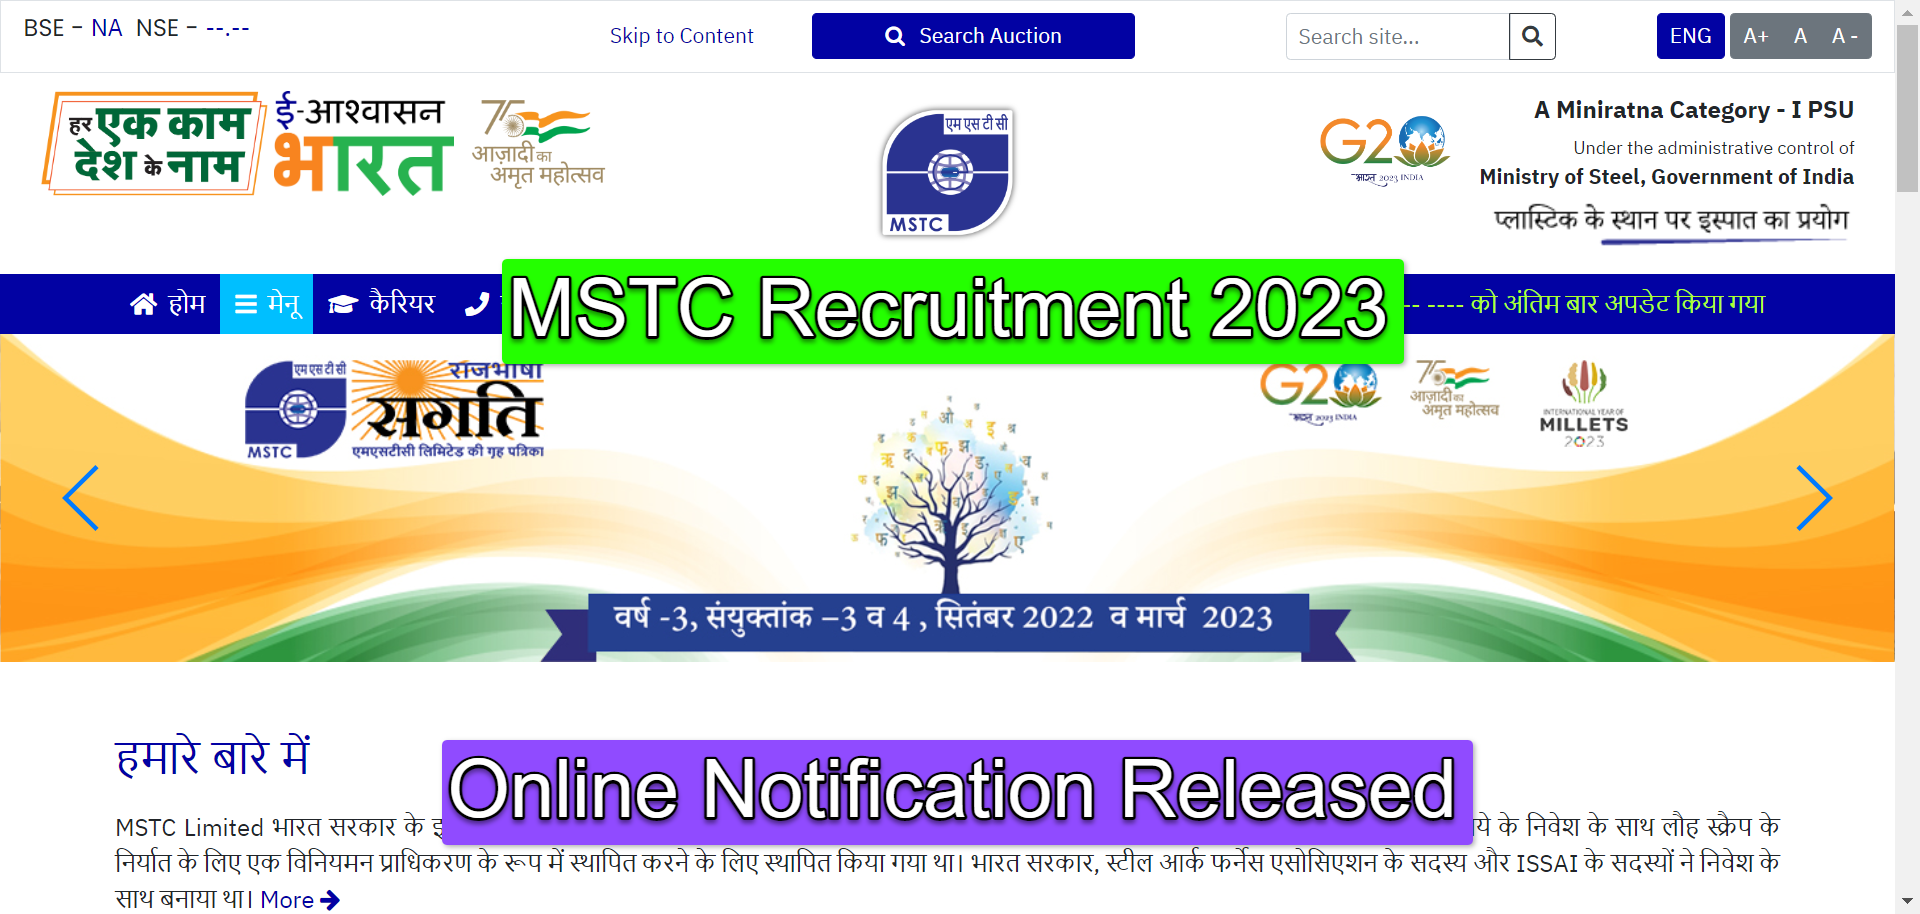 MSTC Recruitment 2023 | Online Notification Released